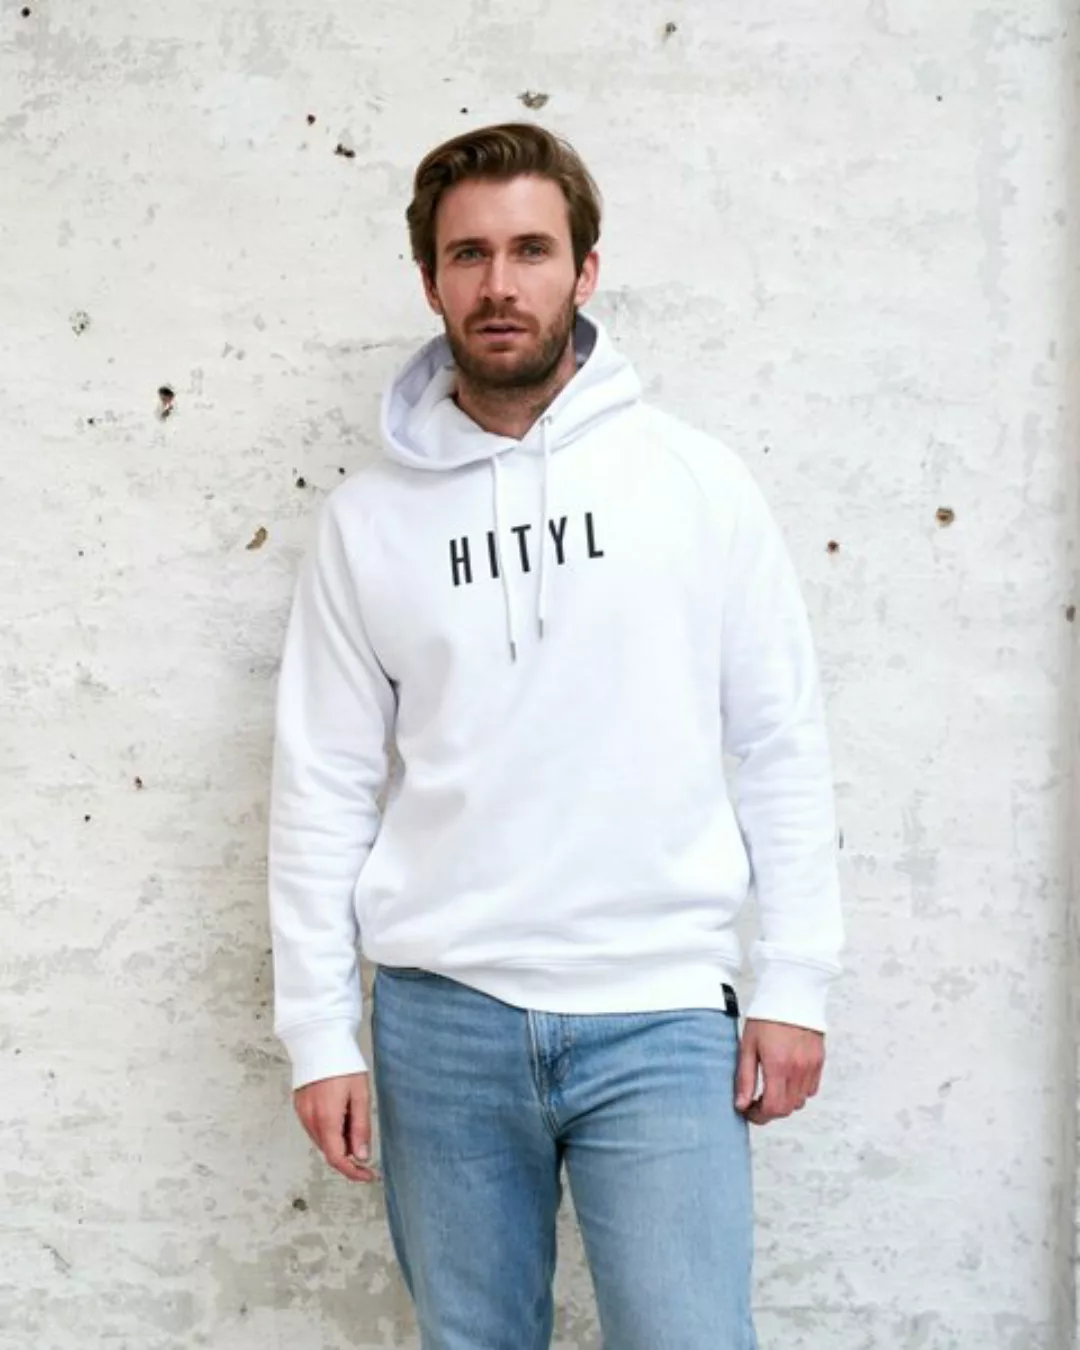 Have I Told You Lately - Limited Edition 2020 Hoodie günstig online kaufen